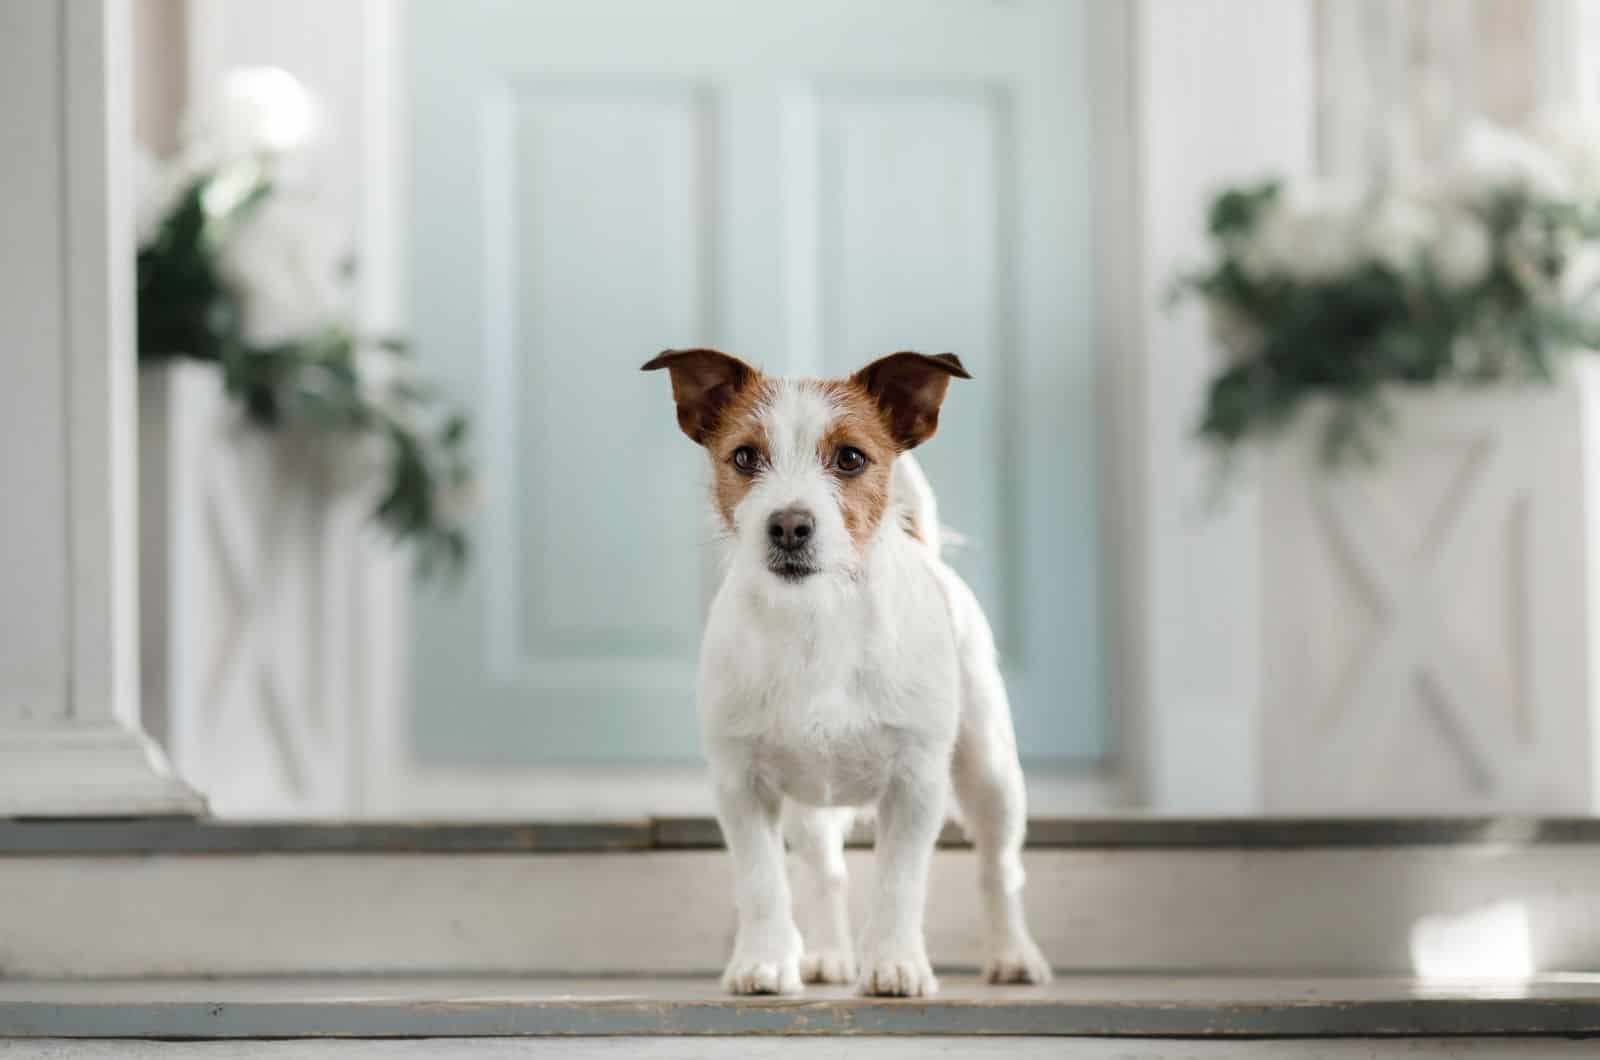 How To Stop Dog From Scratching Door: 10 Useful Tips